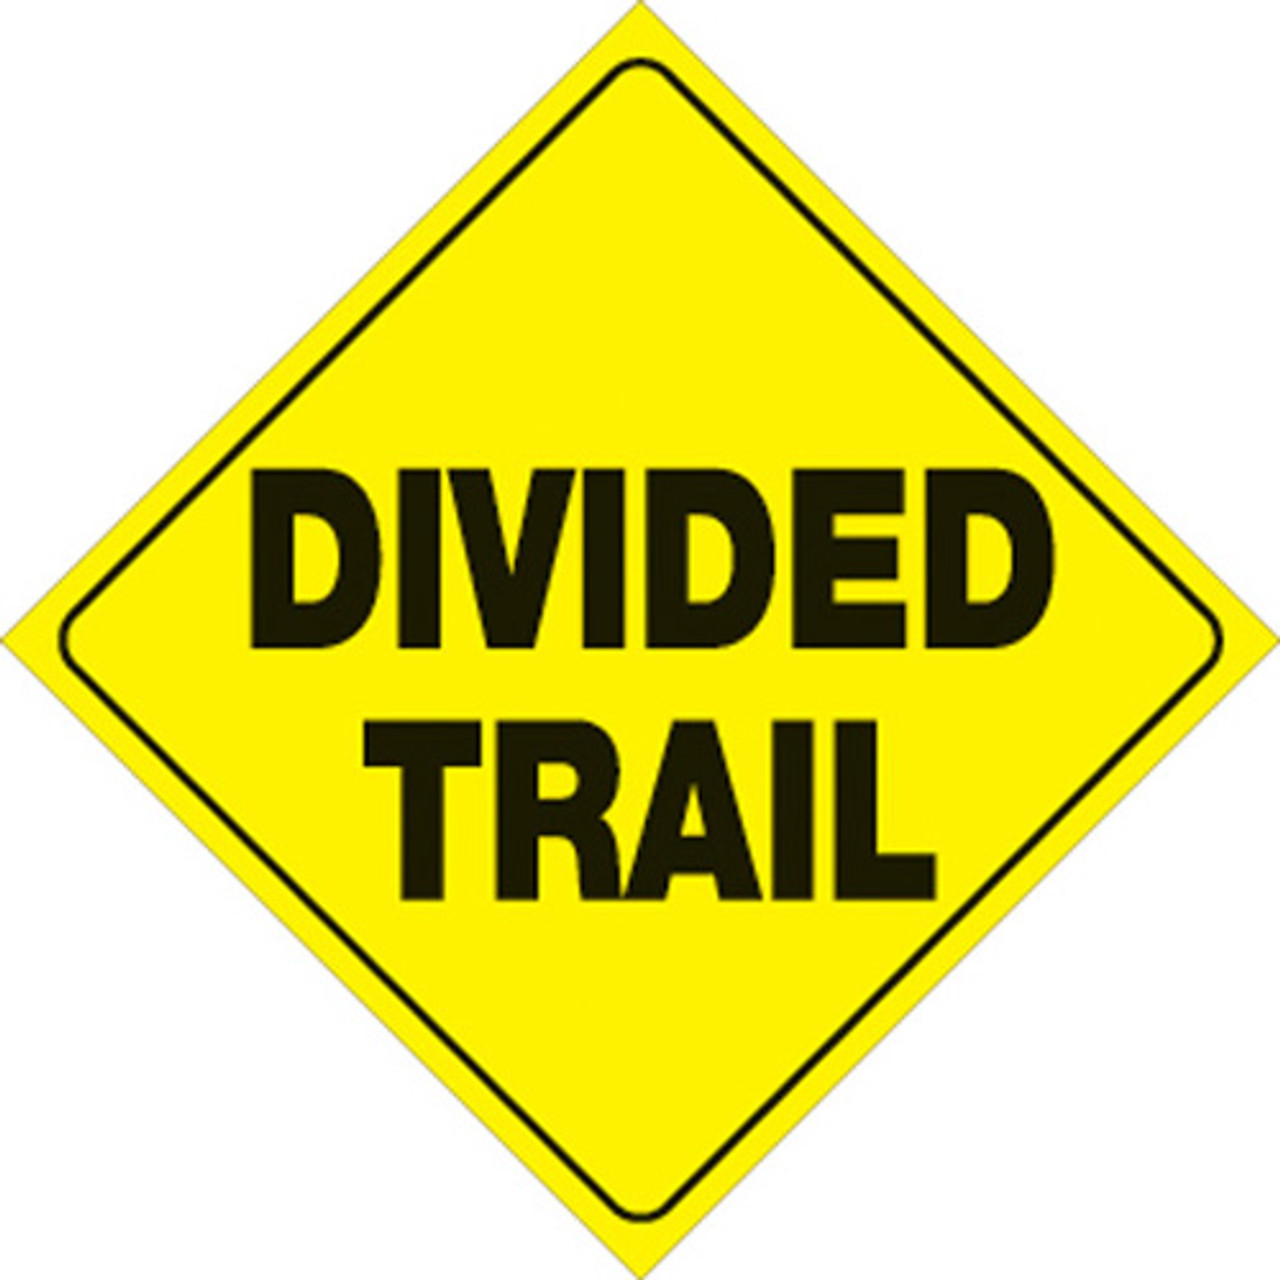 YELLOW PLASTIC REFLECTIVE SIGN 12" - DIVIDED TRAIL (435 DT YR)